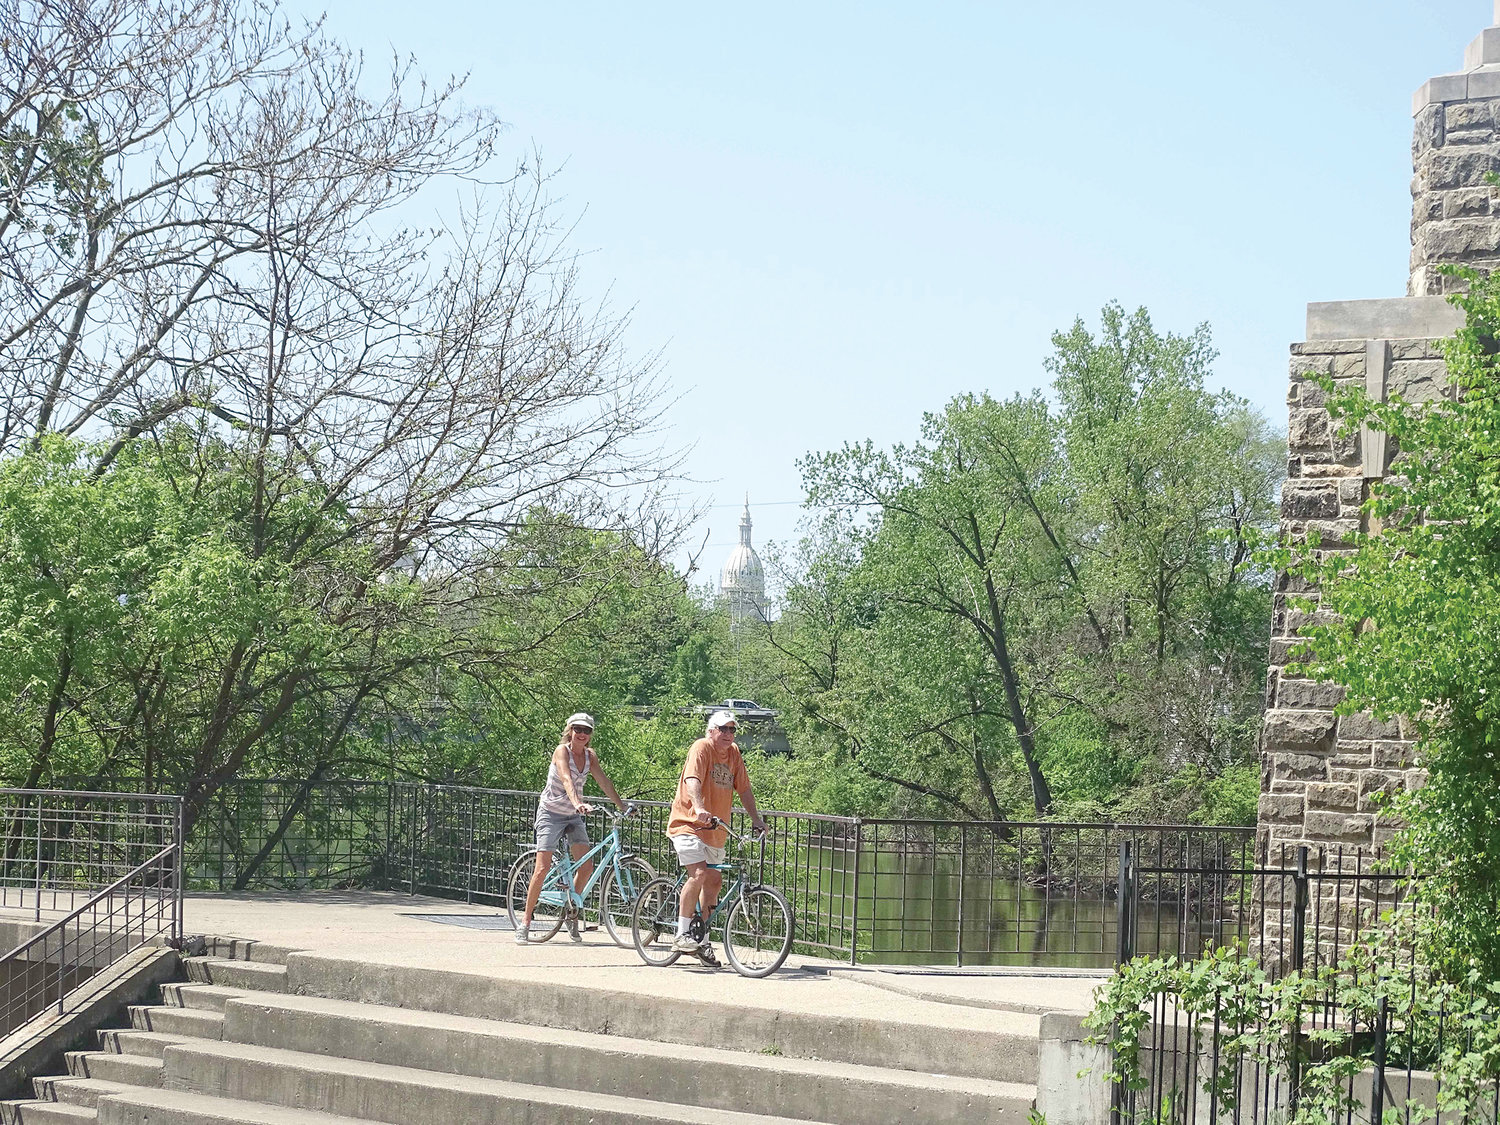 The Brenke Fish Ladder is a popular stop for bicyclists on the Lansing River Trail.